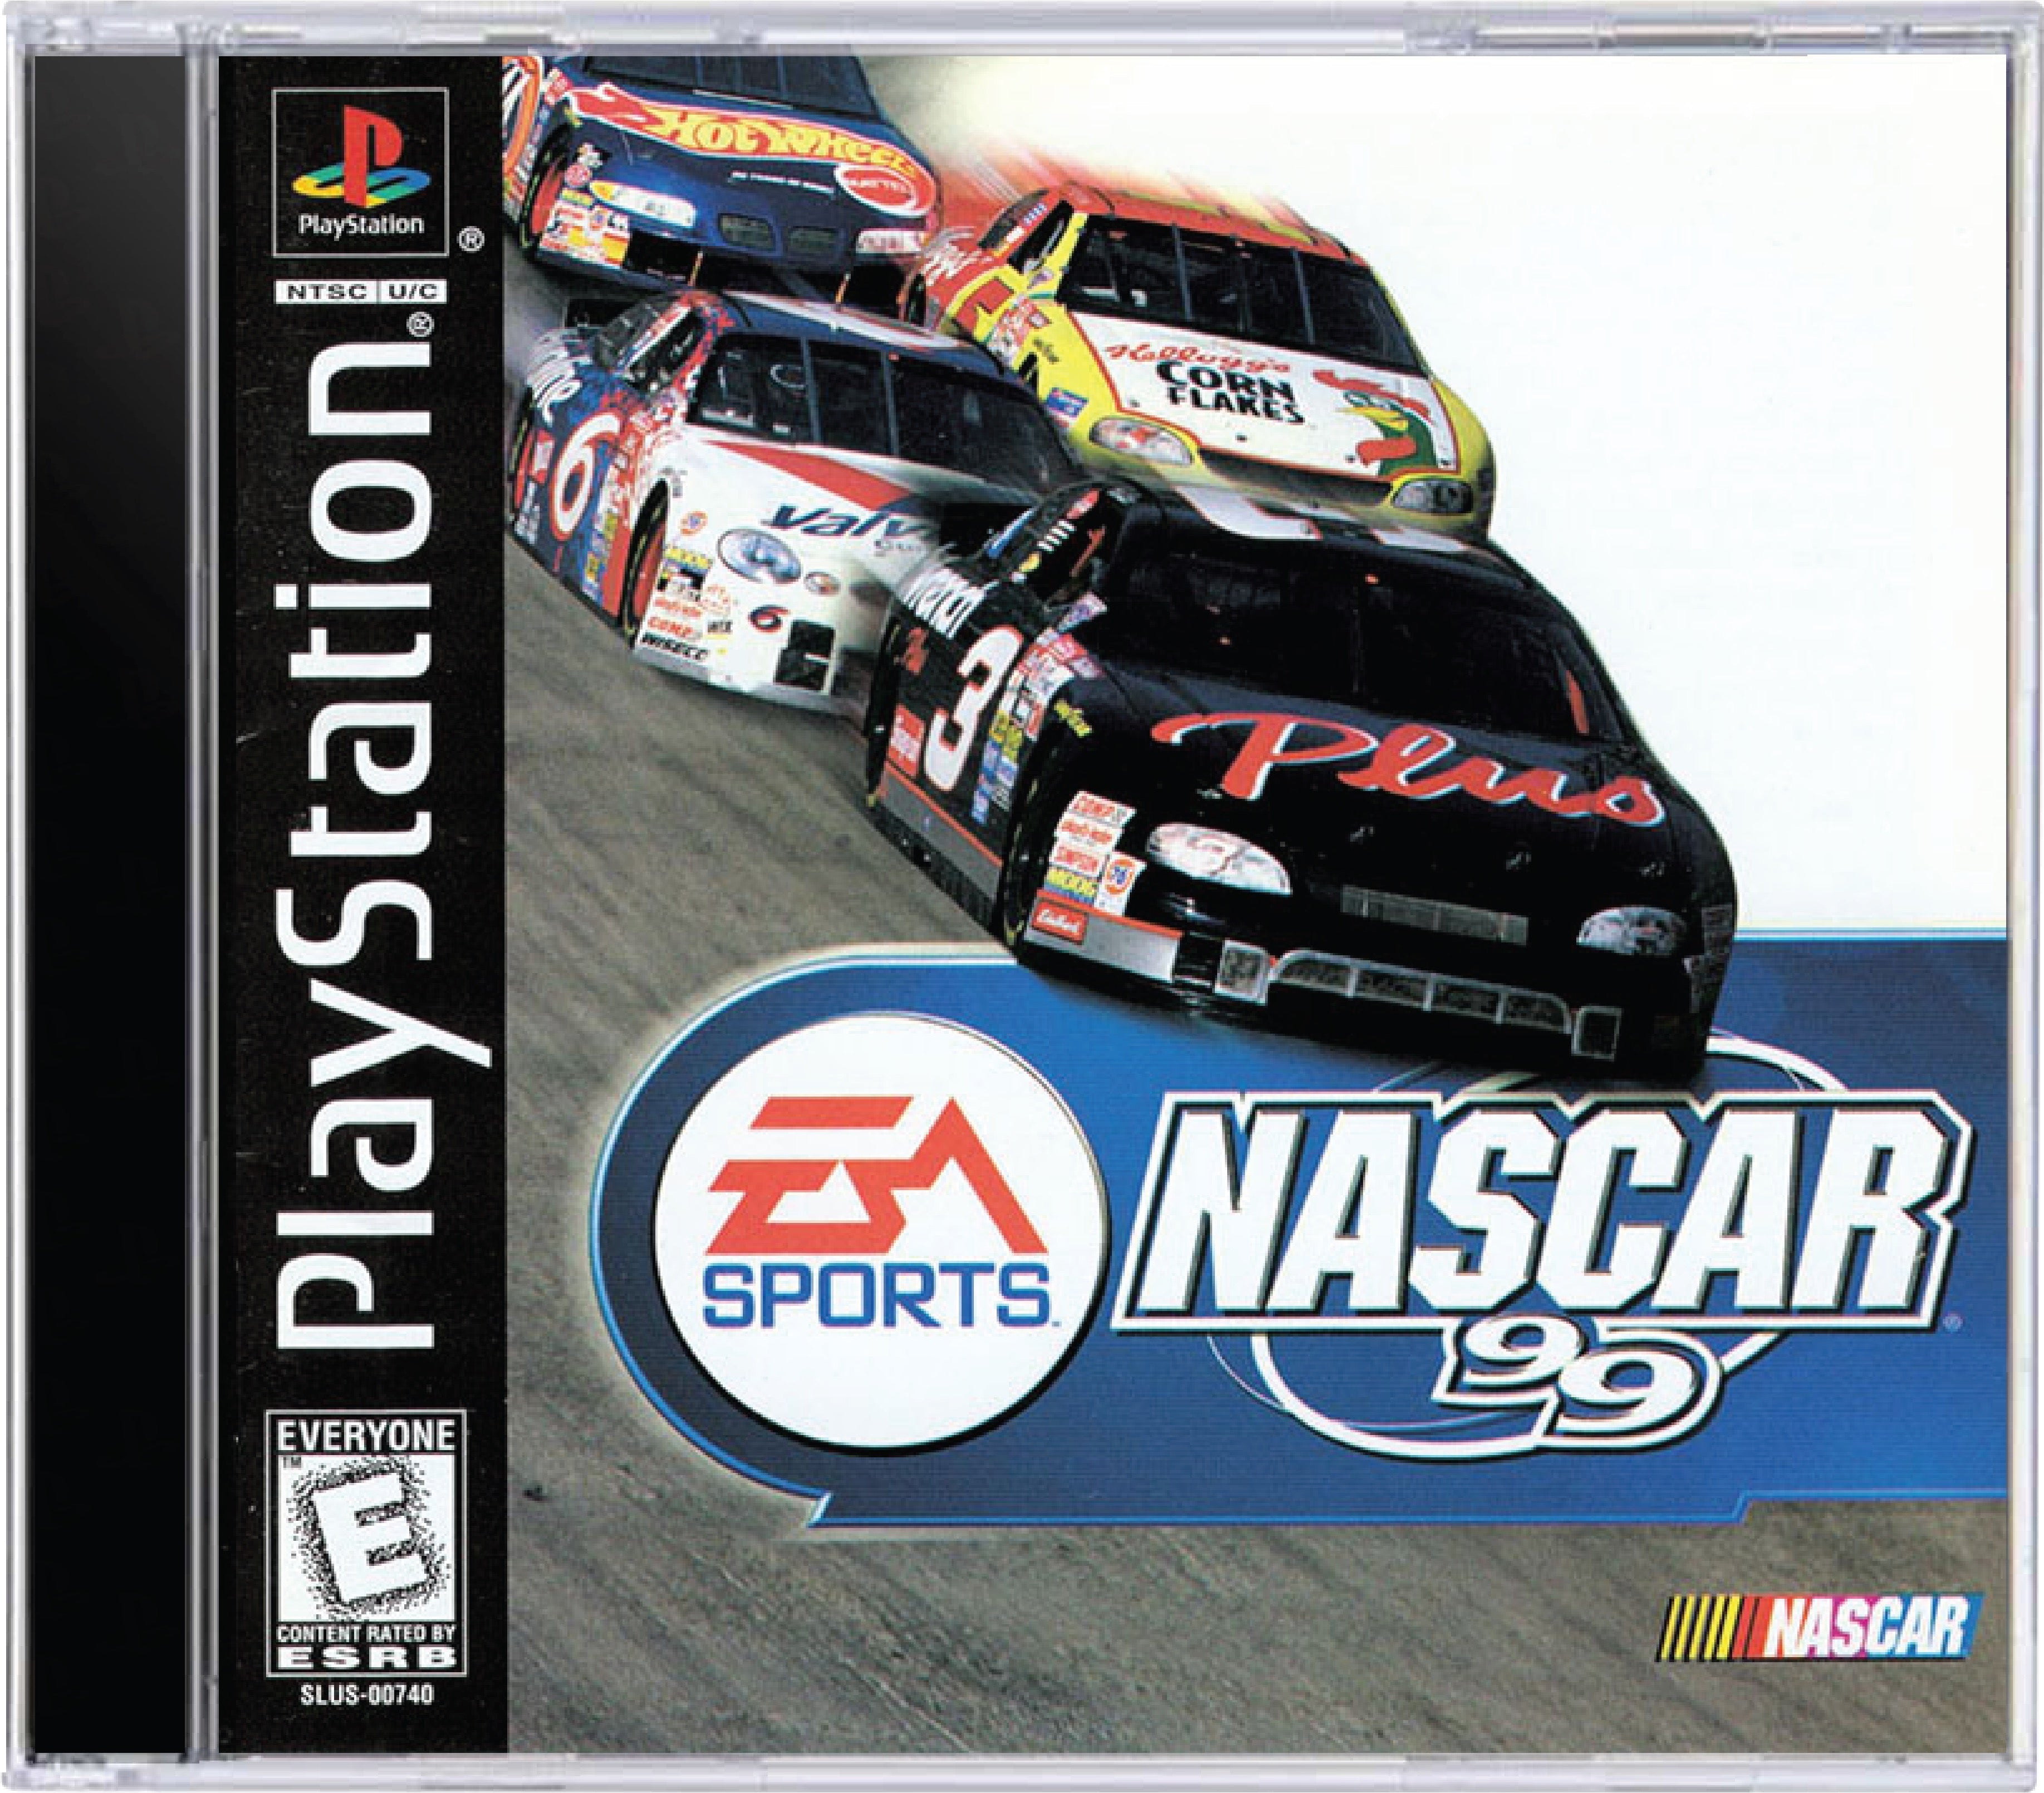 NASCAR 99 Cover Art and Product Photo